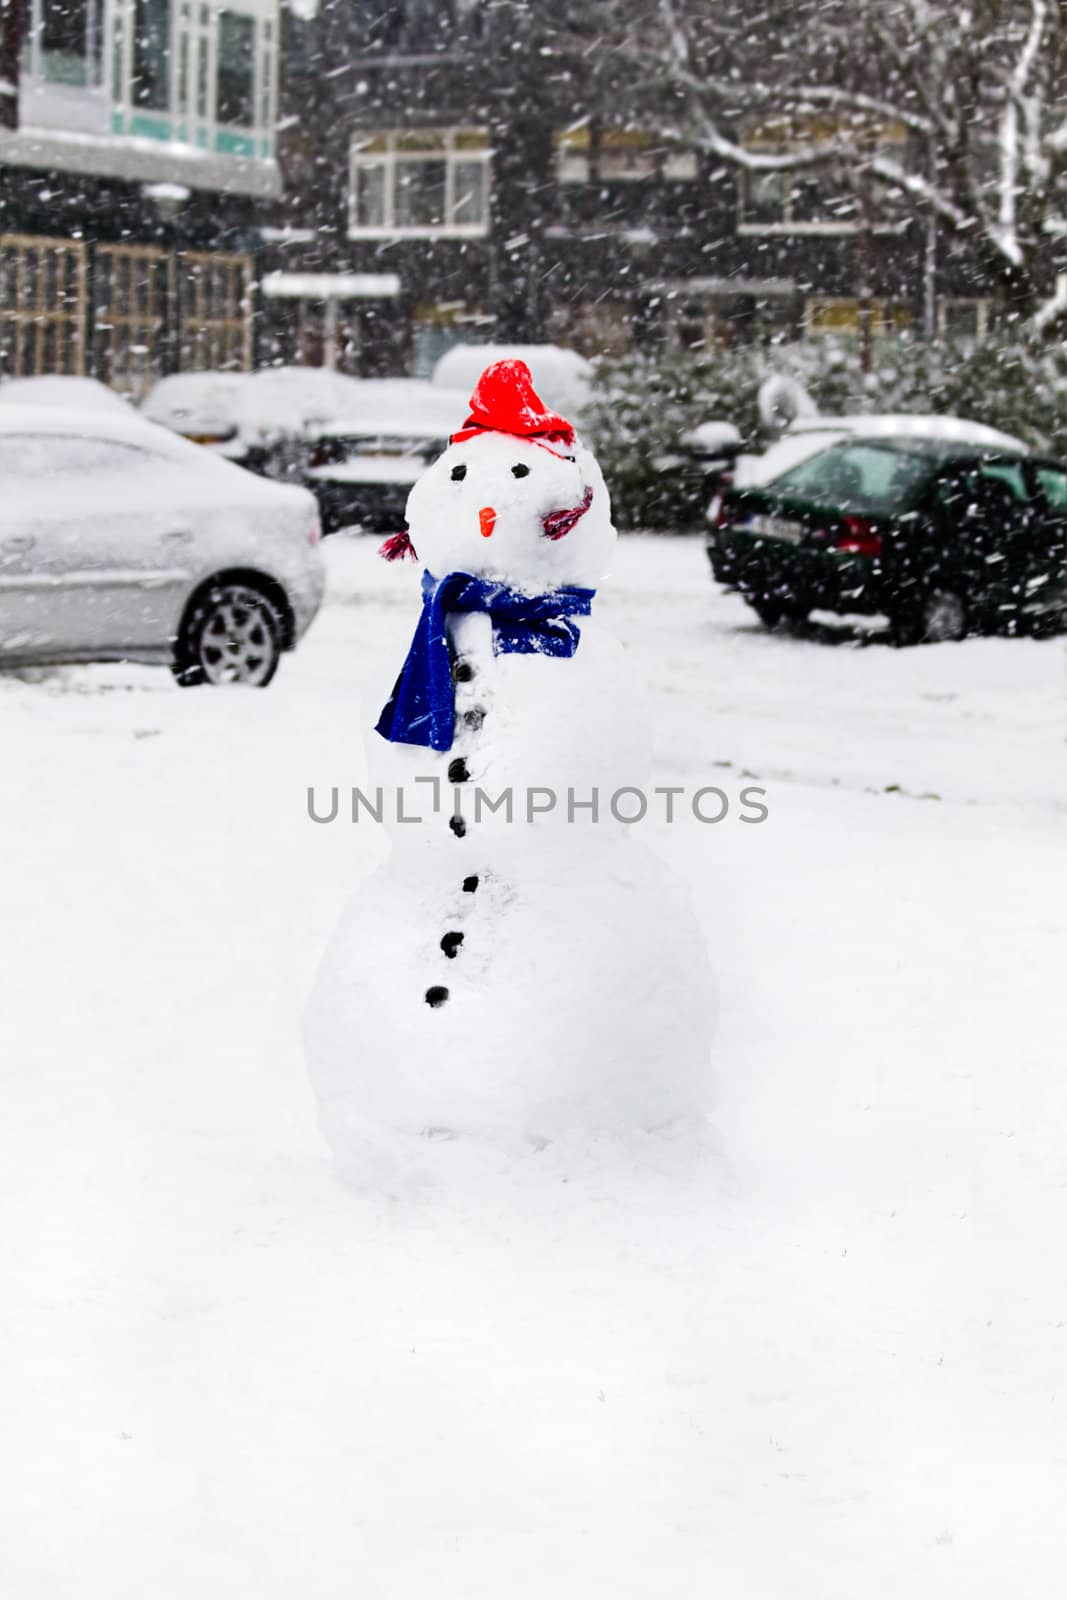 Snow in the city - Snowman by Colette